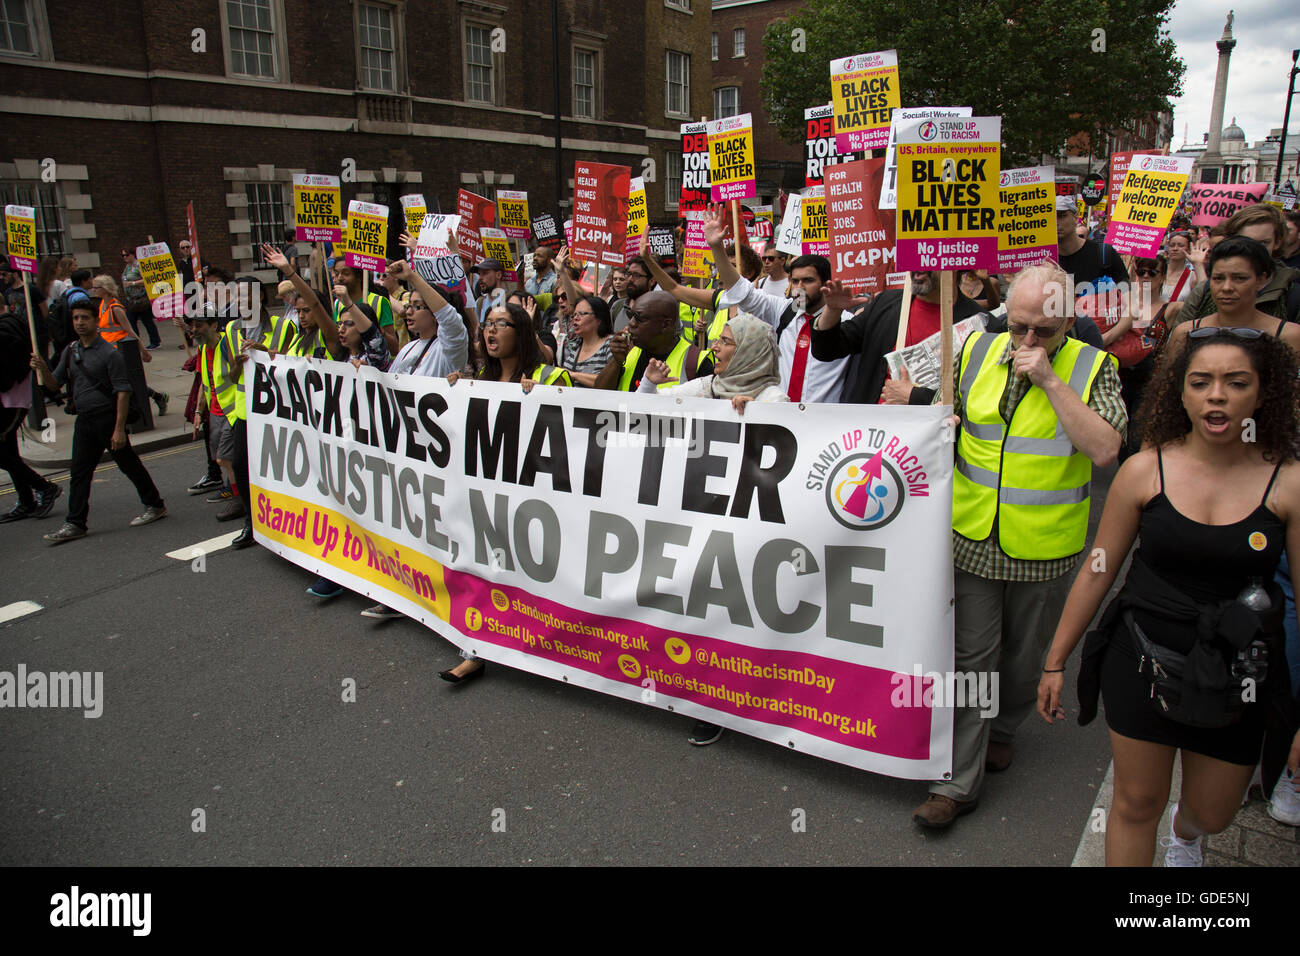 London, UK. 16th July, 2016. Black Lives Matter supporters at the Peoples Assembly demonstration: No More Austerity - No To Racism - Tories Must Go, on Saturday July 16th in London, United Kingdom. Tens of thousands of people gathered to protest in a march through the capital protesting against the Conservative Party cuts. Almost 150 Councillors from across the country have signed a letter criticising the Government for funding cuts and and will be joining those marching in London. Credit:  Michael Kemp/Alamy Live News Stock Photo